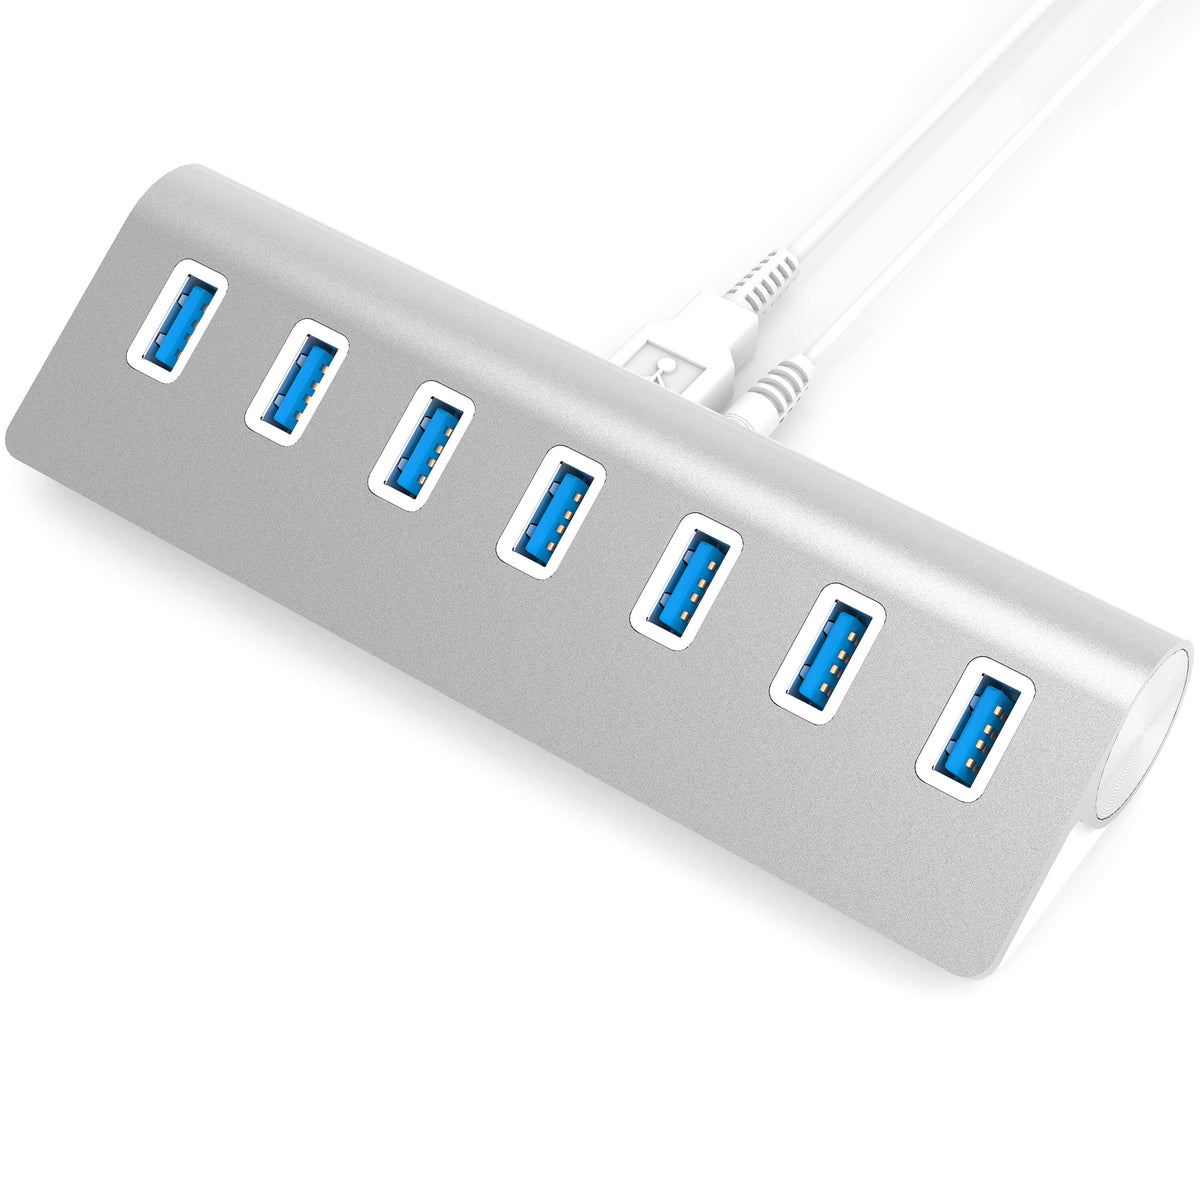 7 Port Aluminum USB 3.0 Hub with 5V/4A Power Adapter | Silver